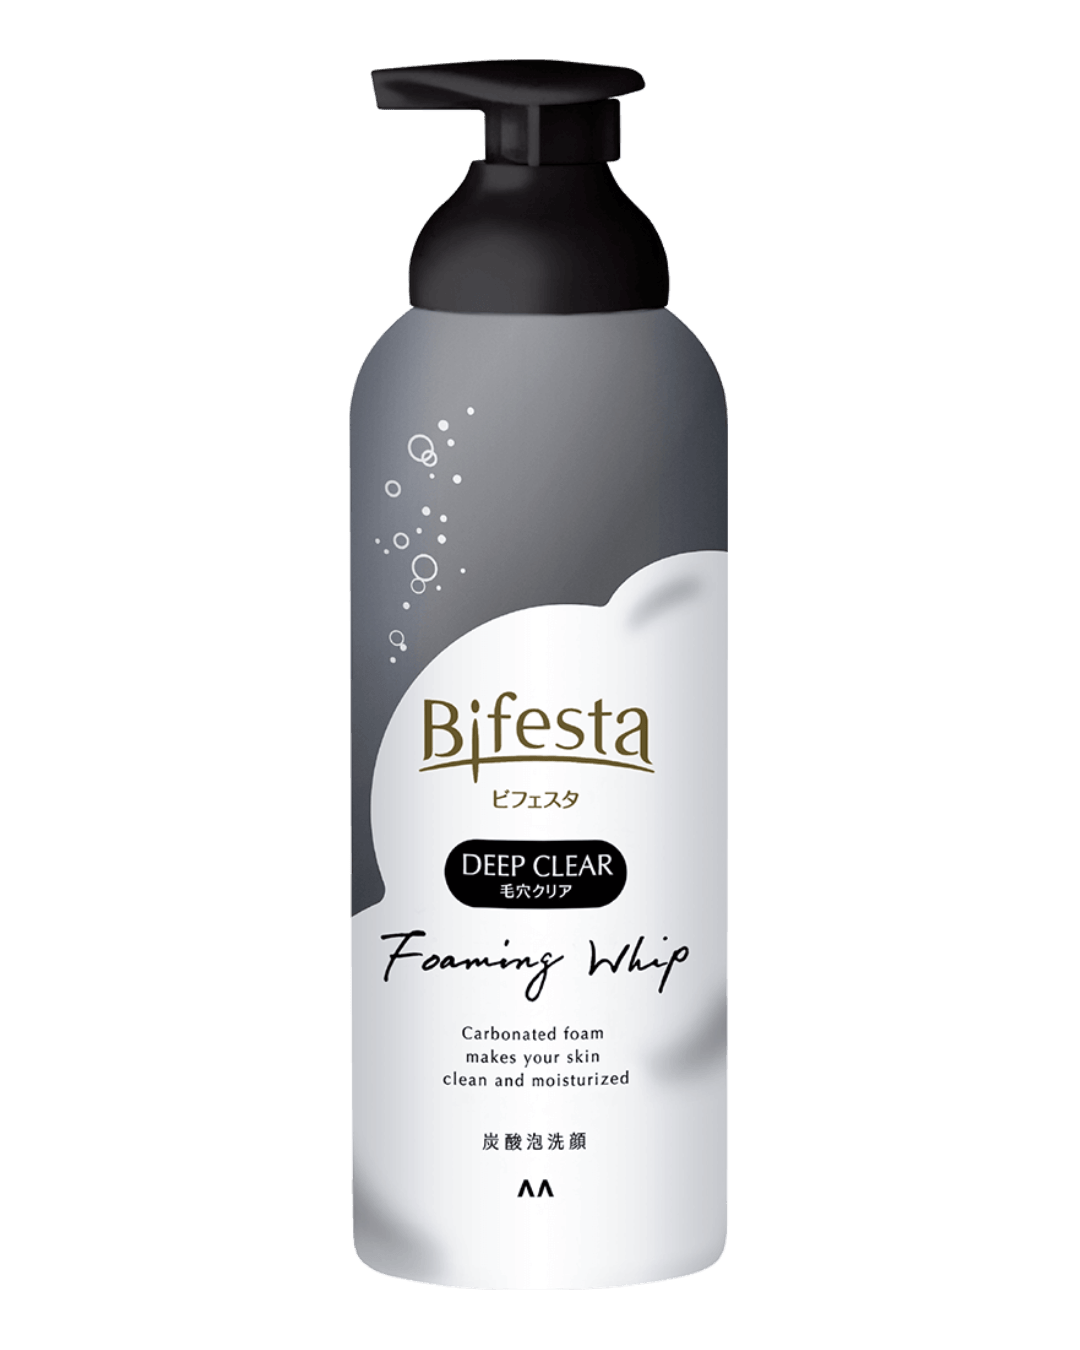 Daily Vanity Beauty Awards 2024 Best Skincare Bifesta Foaming Whip Deep Clear Voted By Beauty Experts